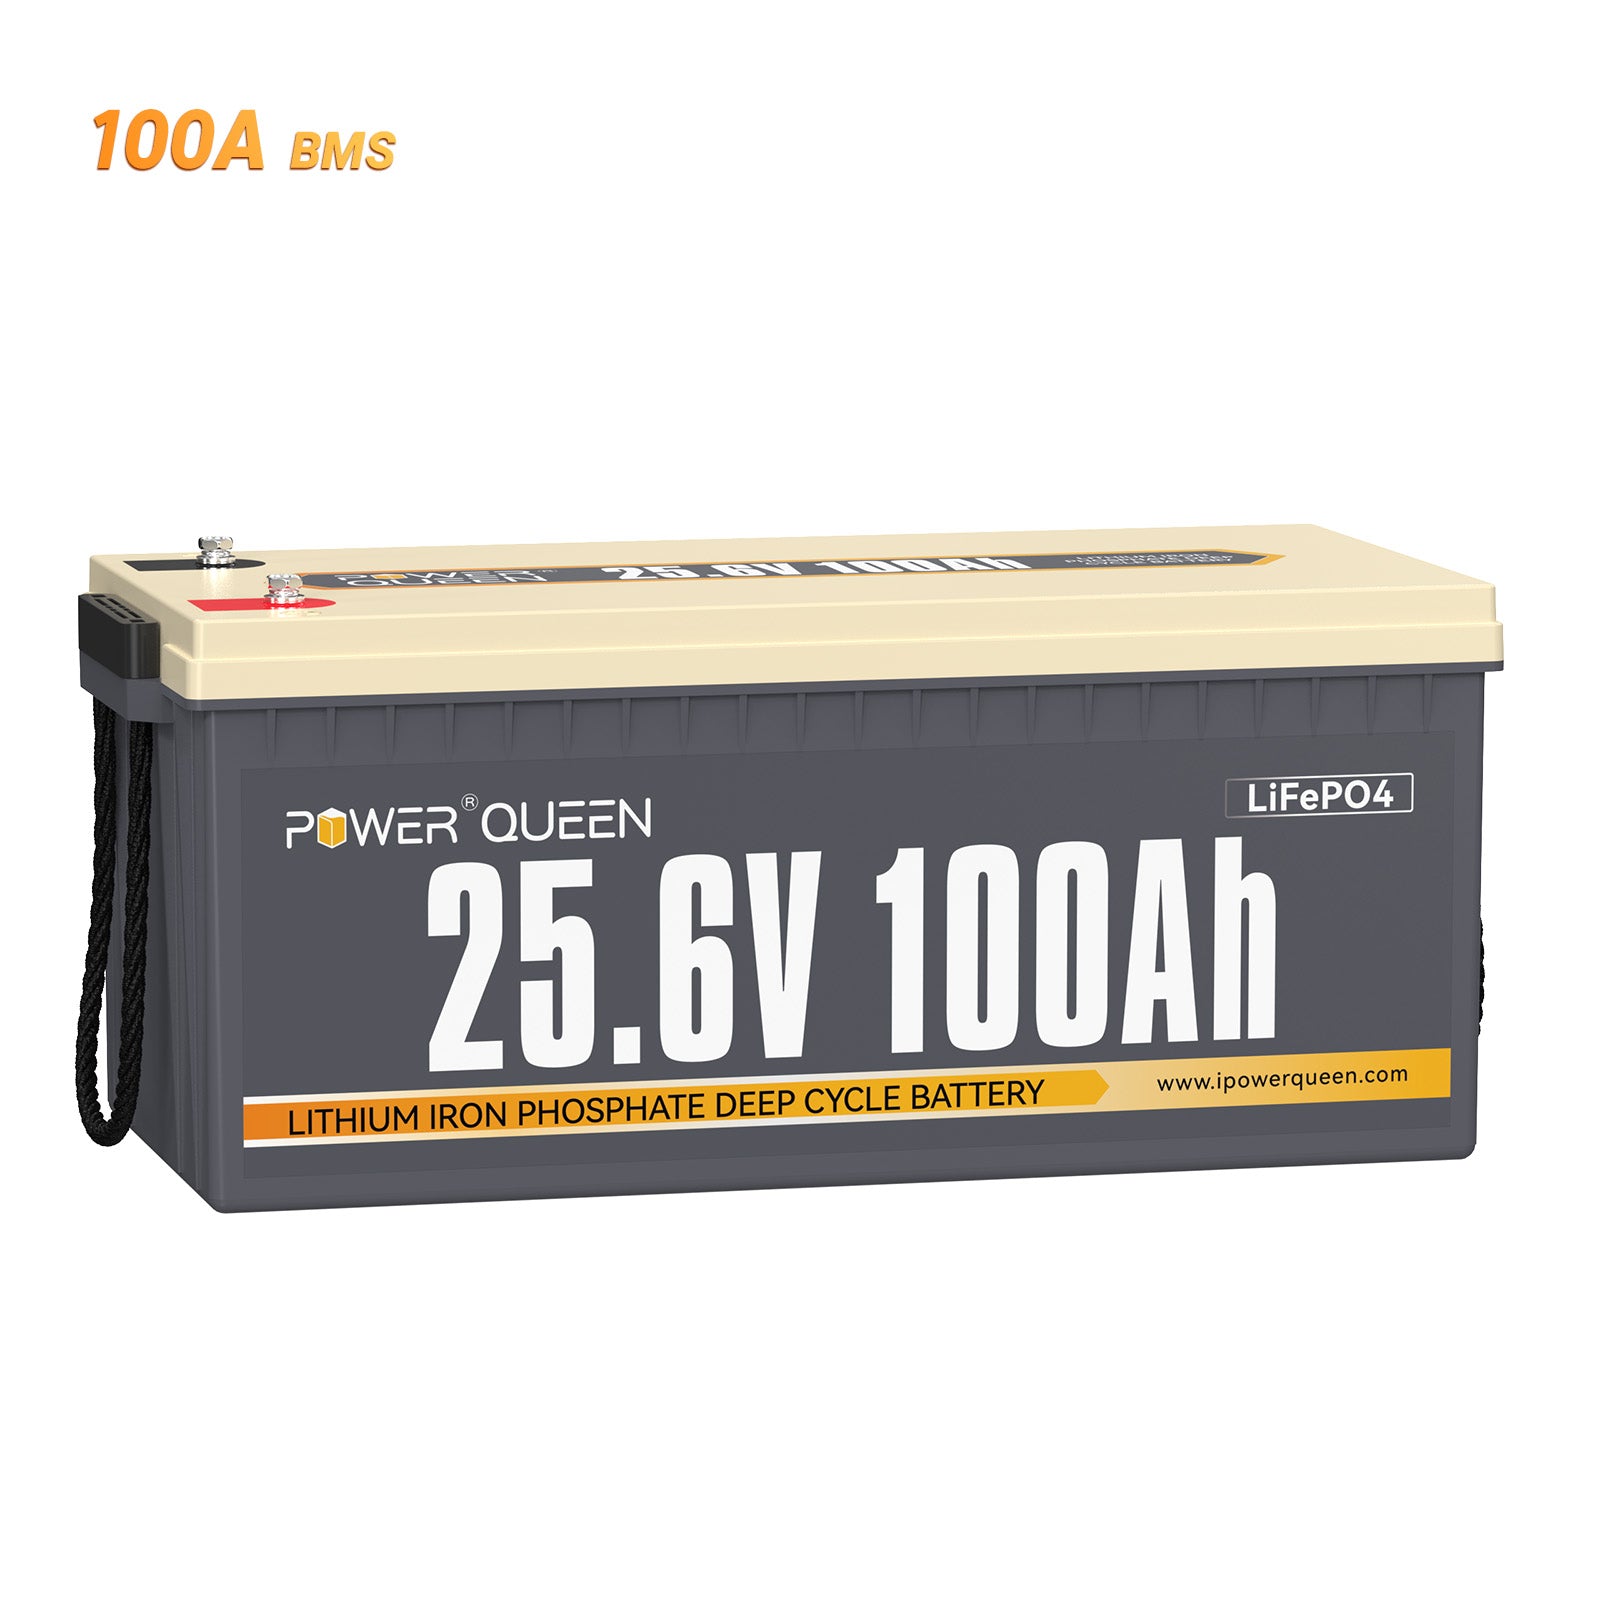 Power Queen 24V 100Ah LiFePO4 battery, built-in 100A BMS